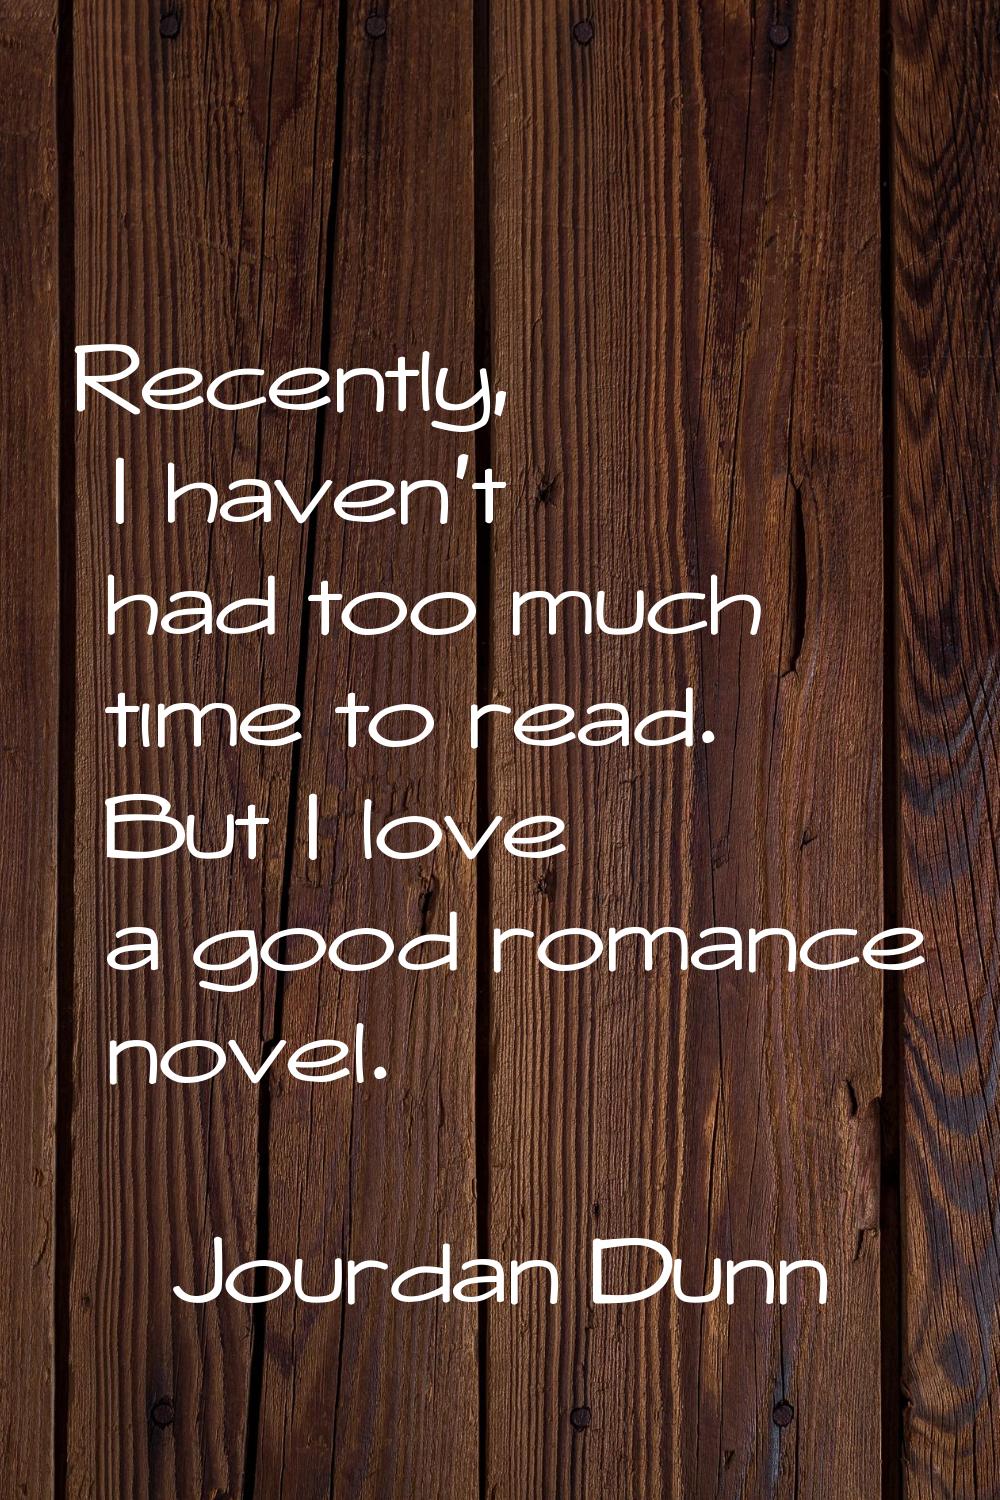 Recently, I haven't had too much time to read. But I love a good romance novel.